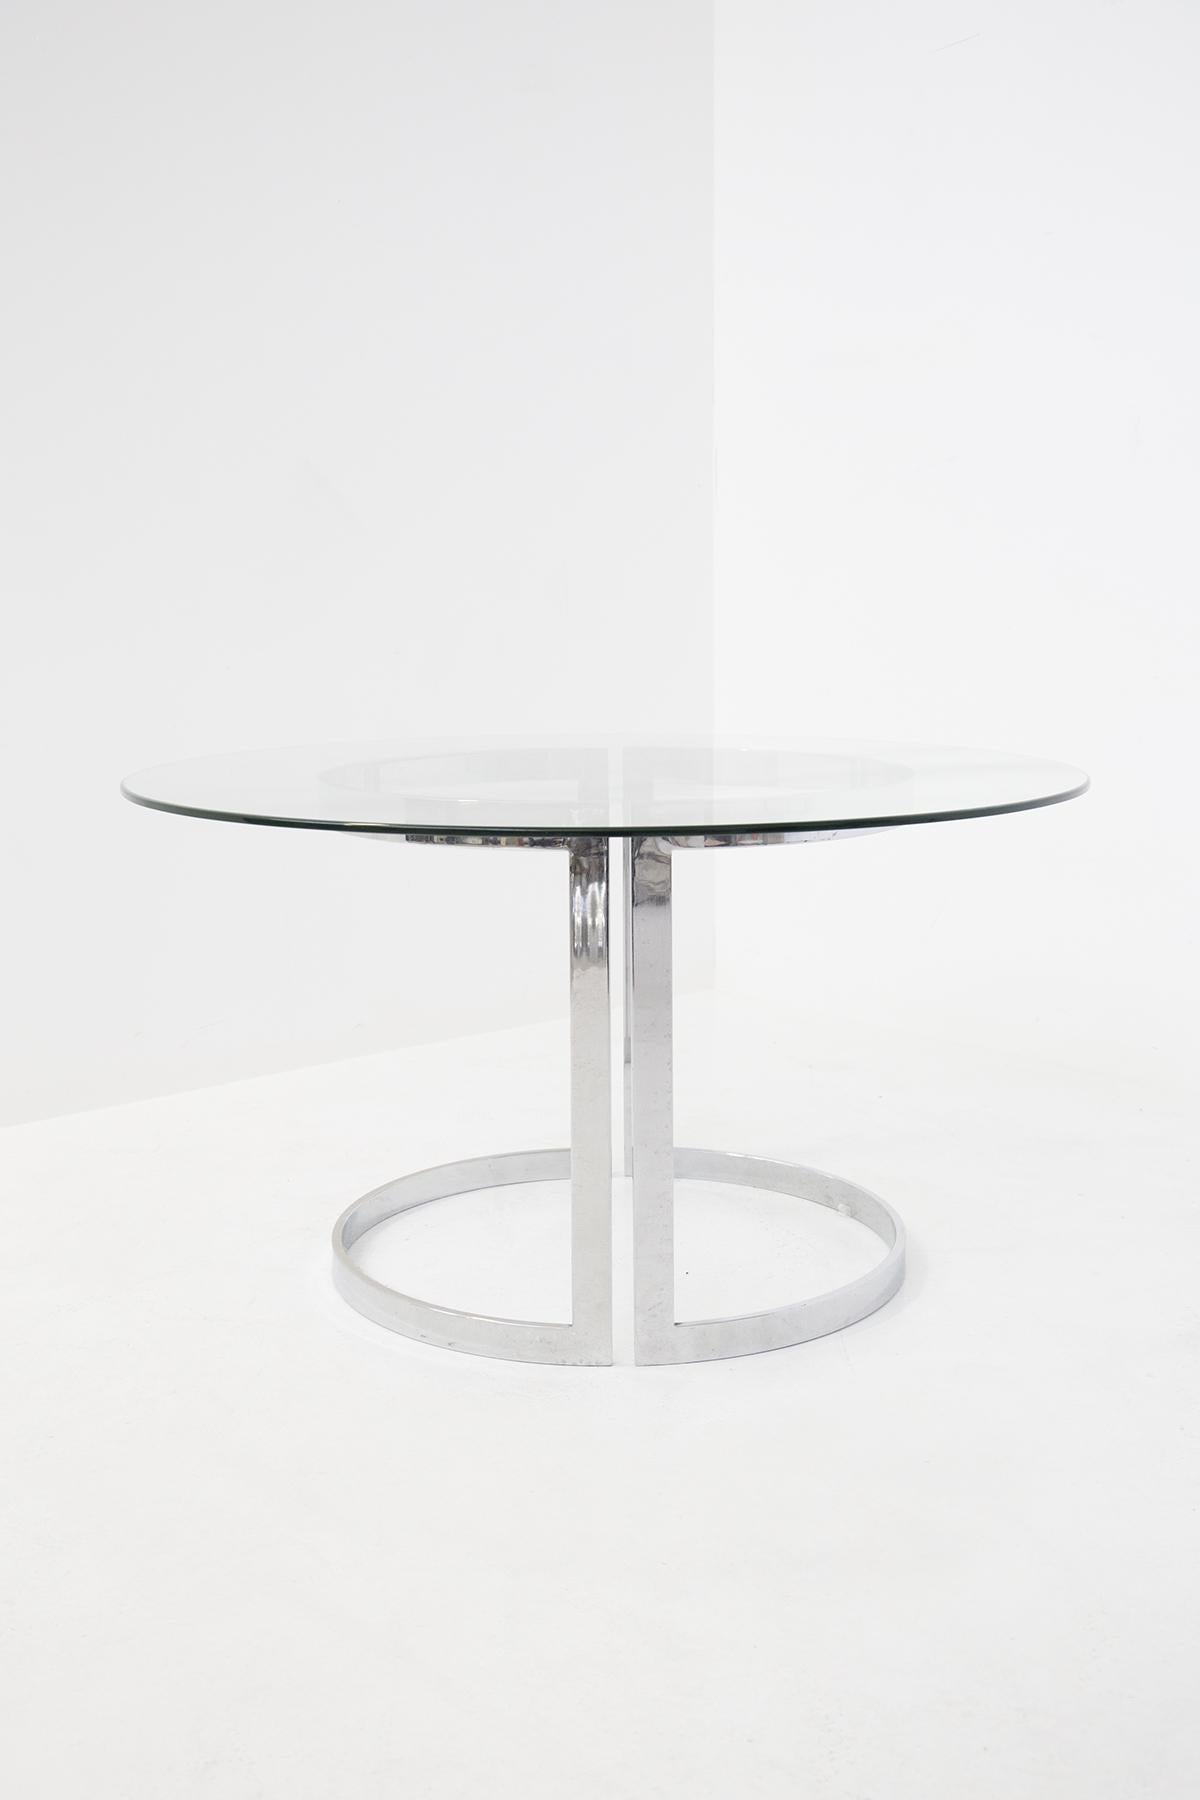 Polychromed Round Steel and Glass Coffee Table by Vittorio Introini for Vips Residence